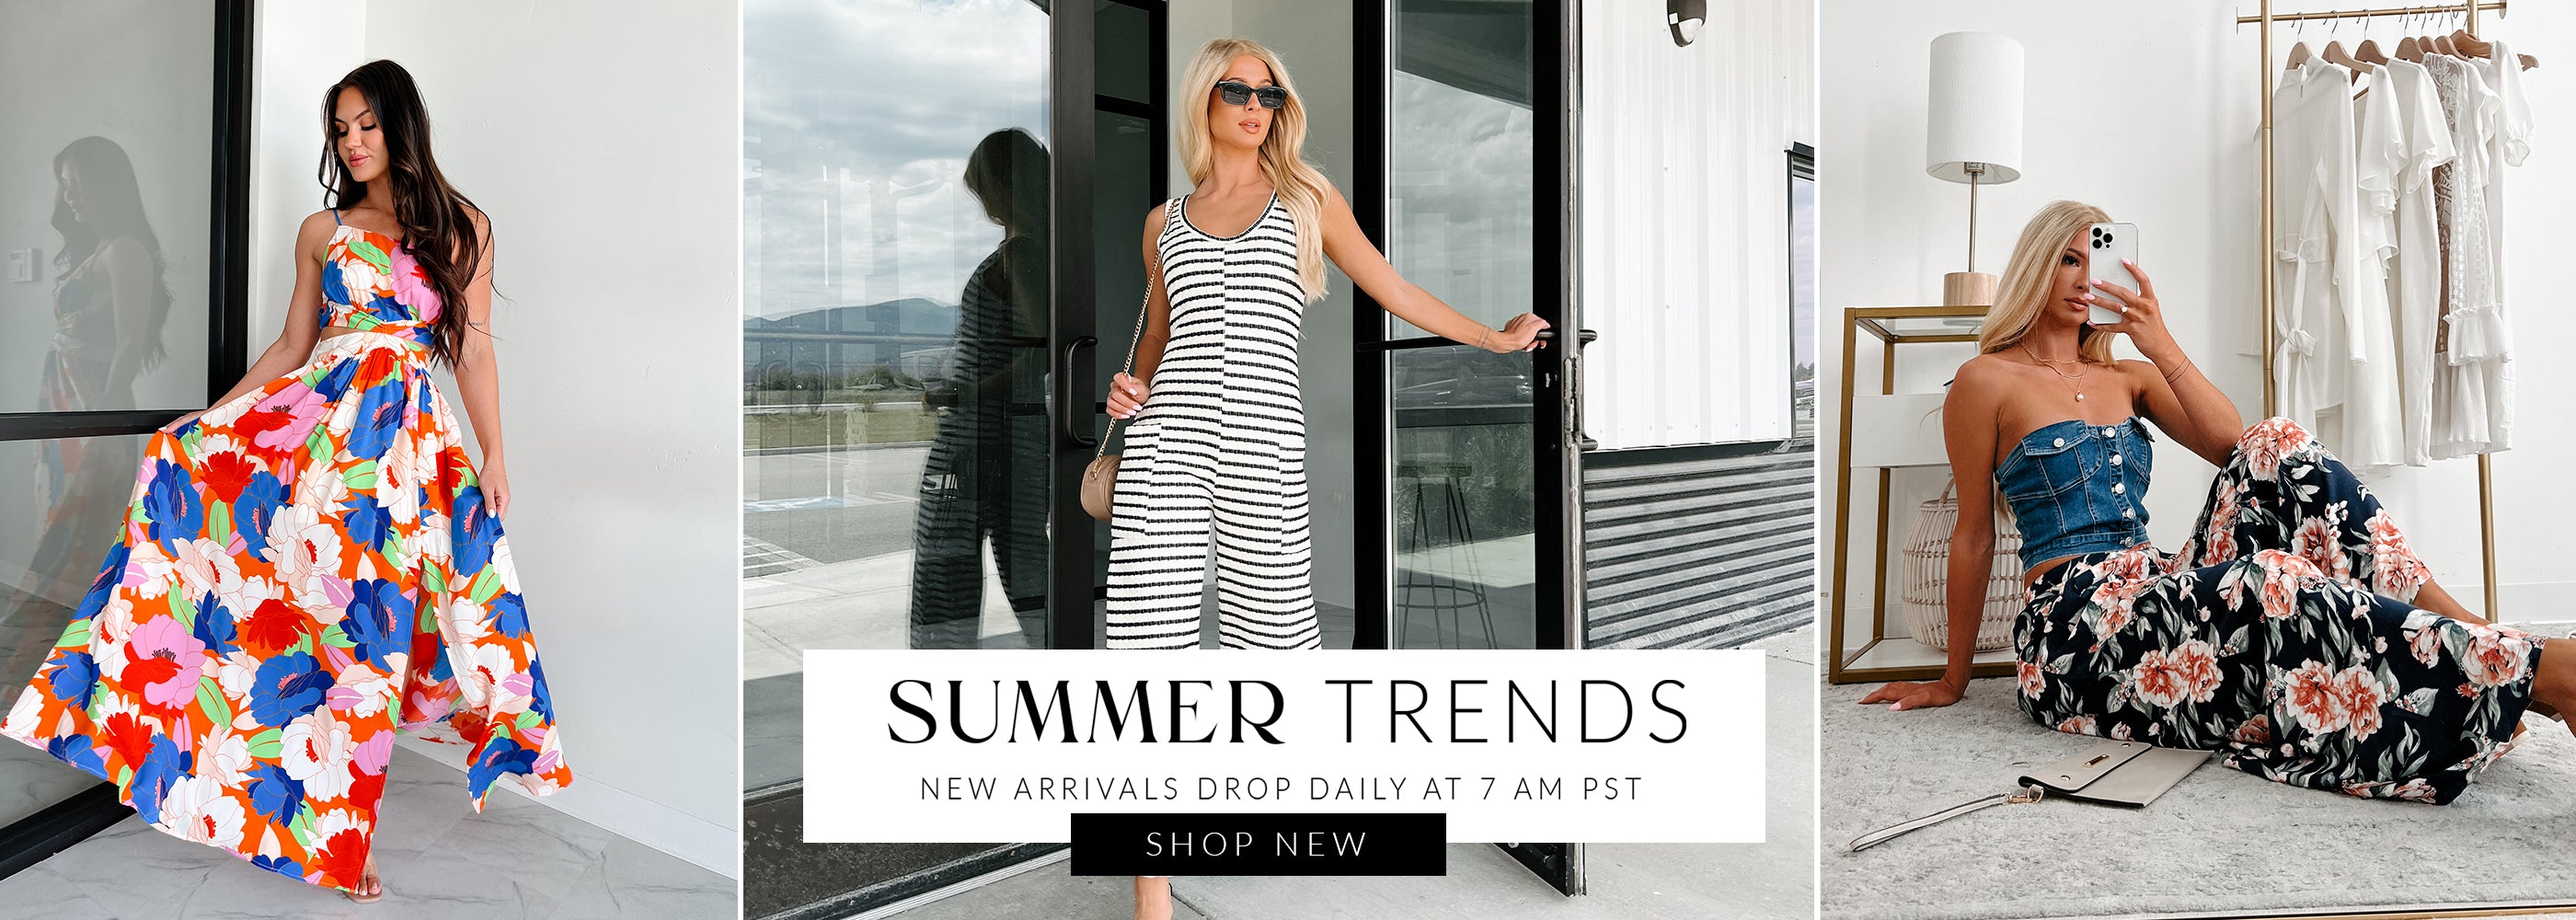 Collage of models wearing a bright floral maxi dress, a black and white striped jumpsuit and a denim top with navy floral pants. Headline says "Summer Trends, New Arrivals Drop Daily at 7 am PST". Call to Action says "Shop New" and links to the New Arrivals Collection.